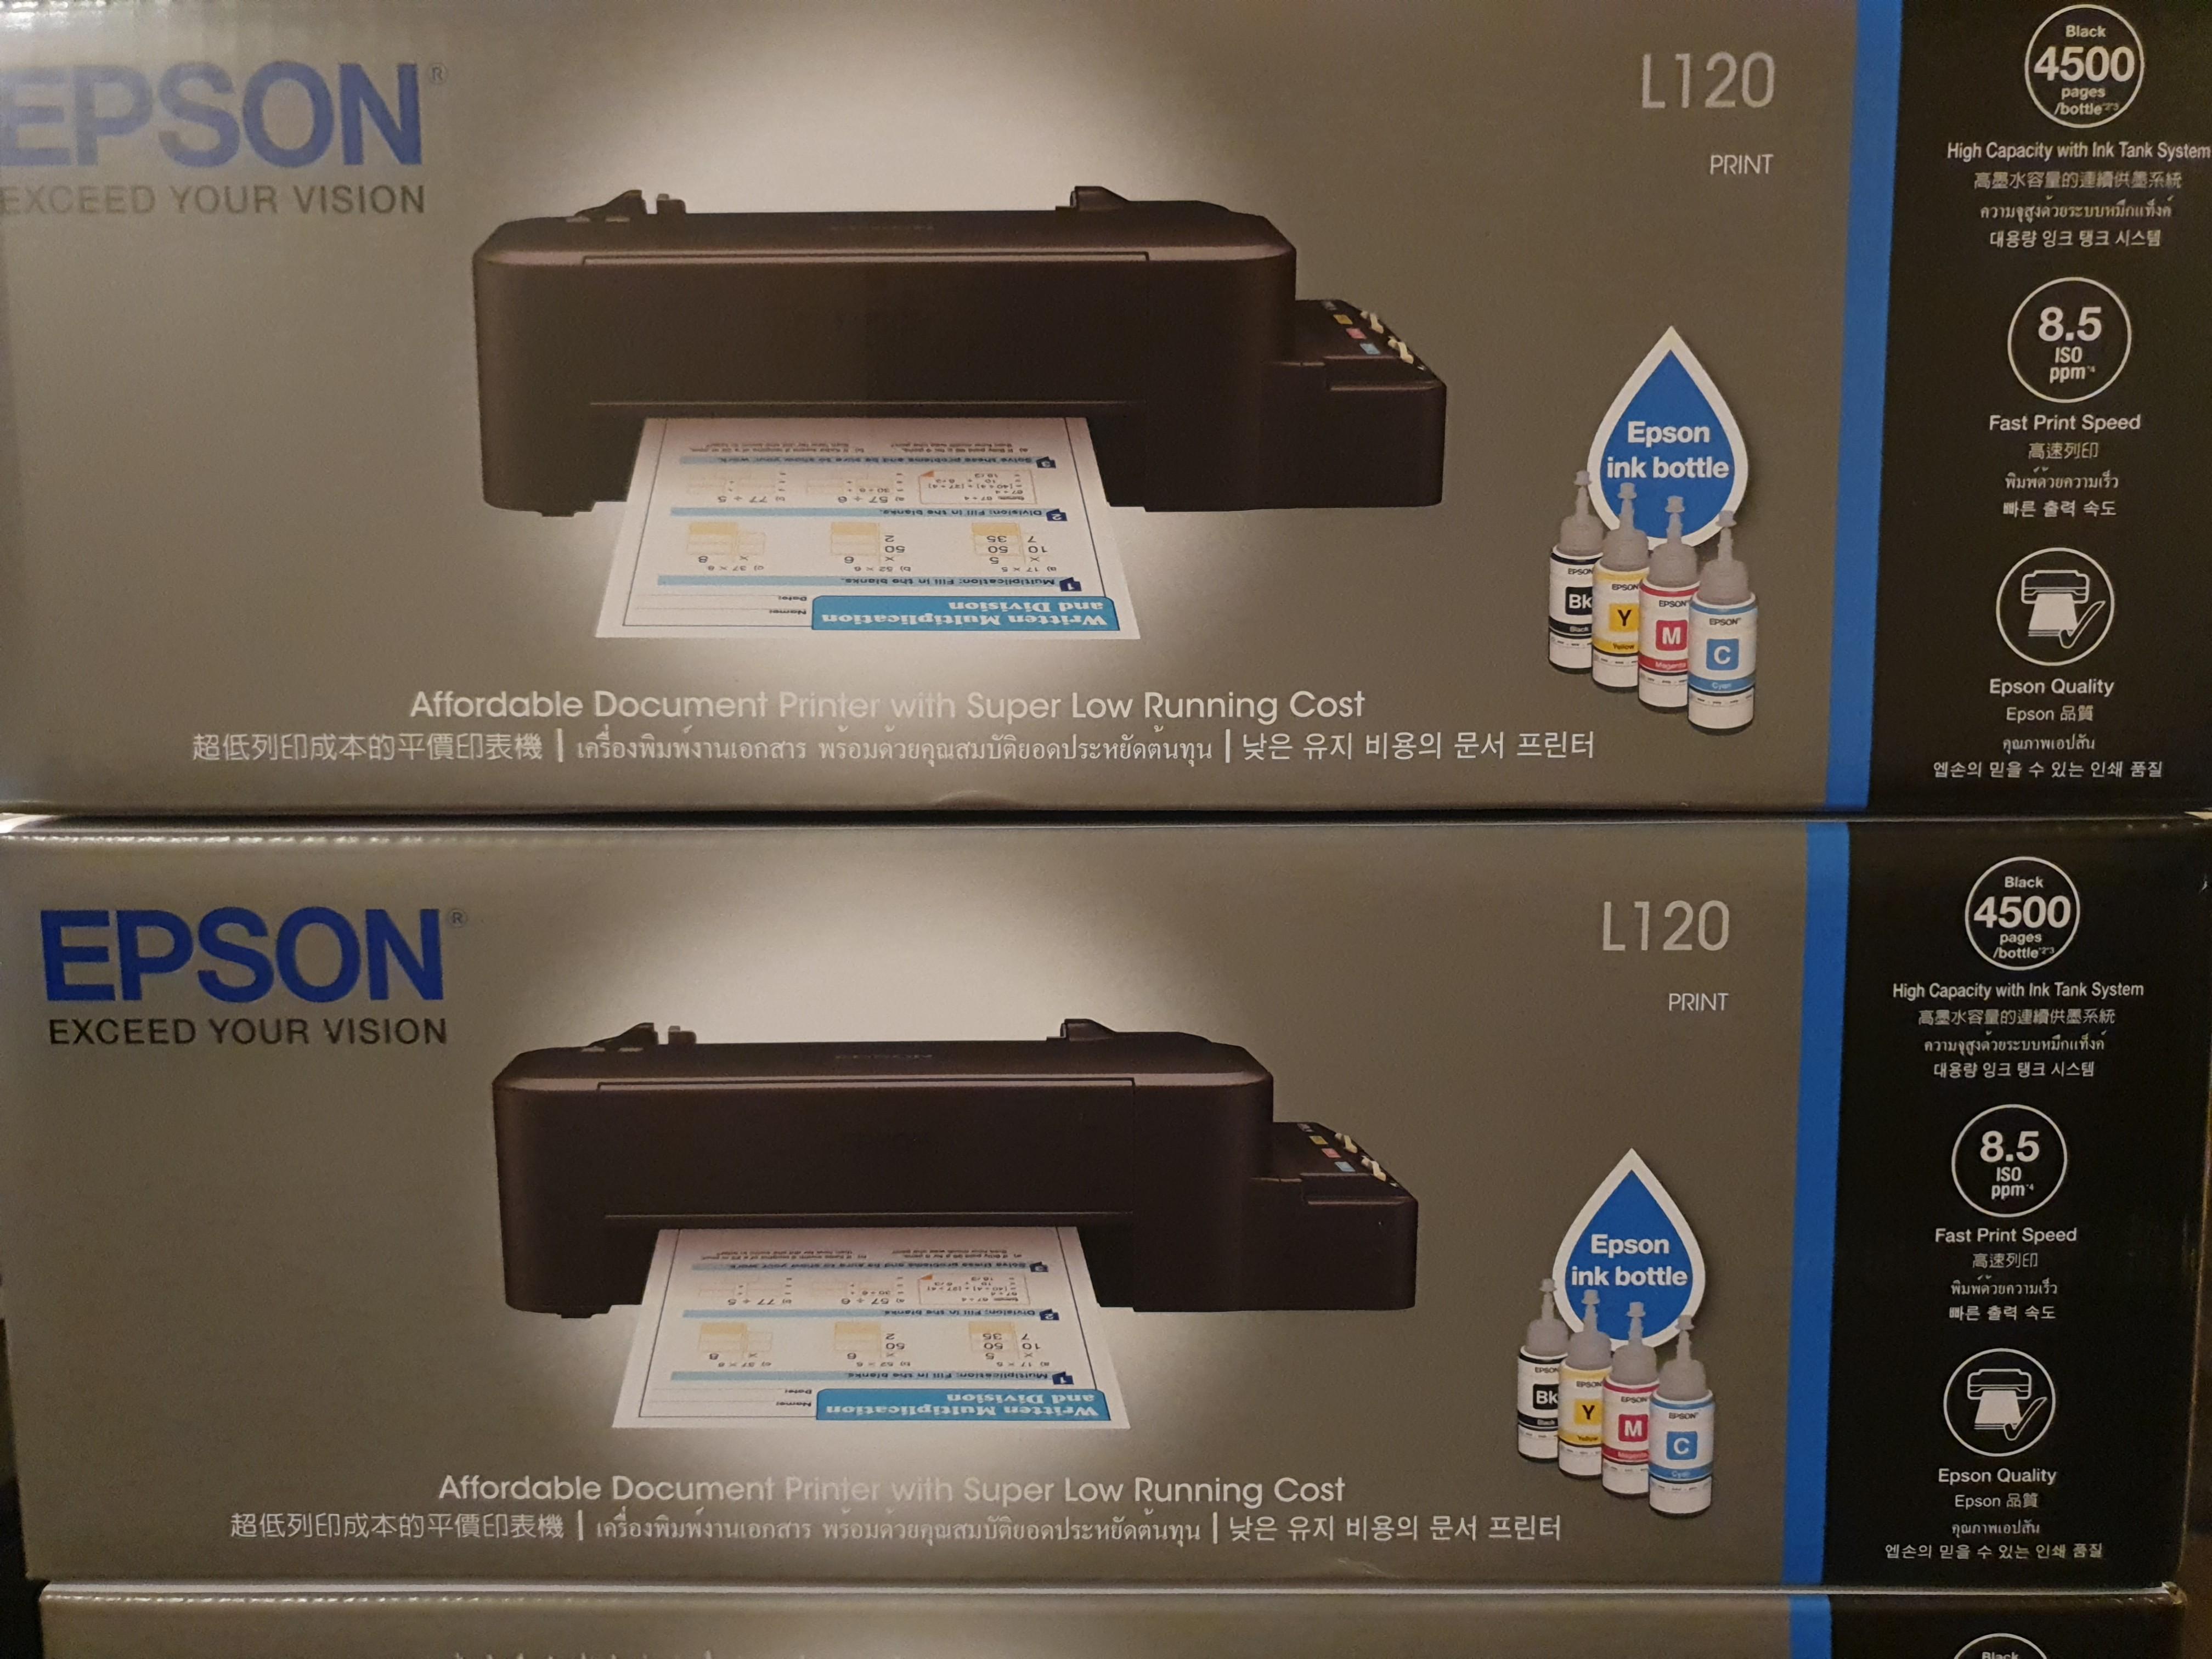 Epson L120 Single Function Ink Tank Printer Bnew Computers And Tech Printers Scanners And Copiers 4869